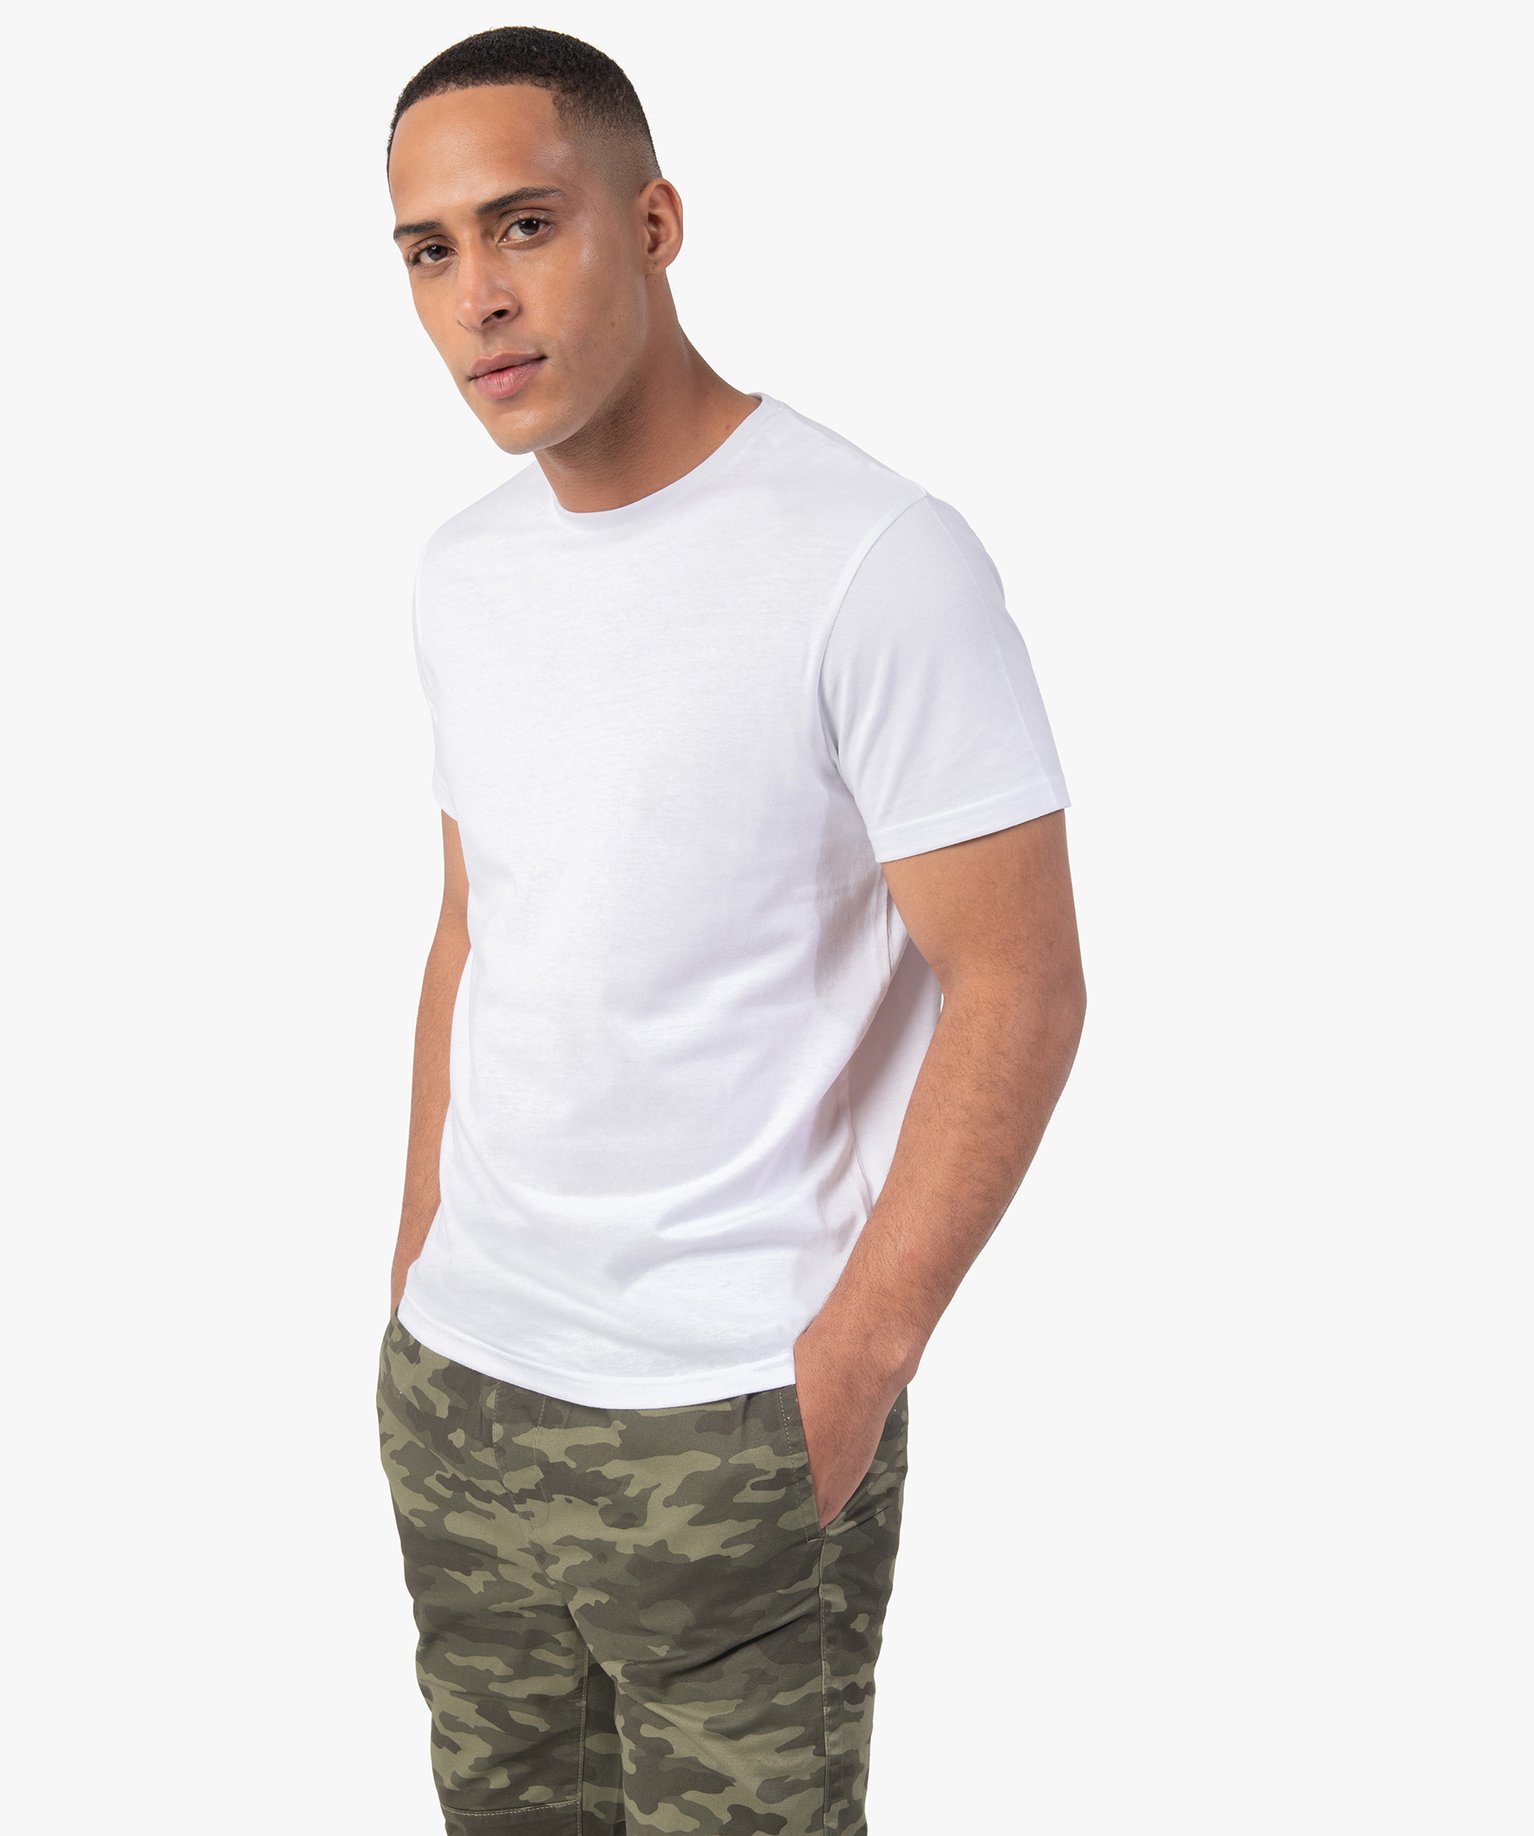 tee-shirt a manches courtes et col rond homme blanc tee-shirts